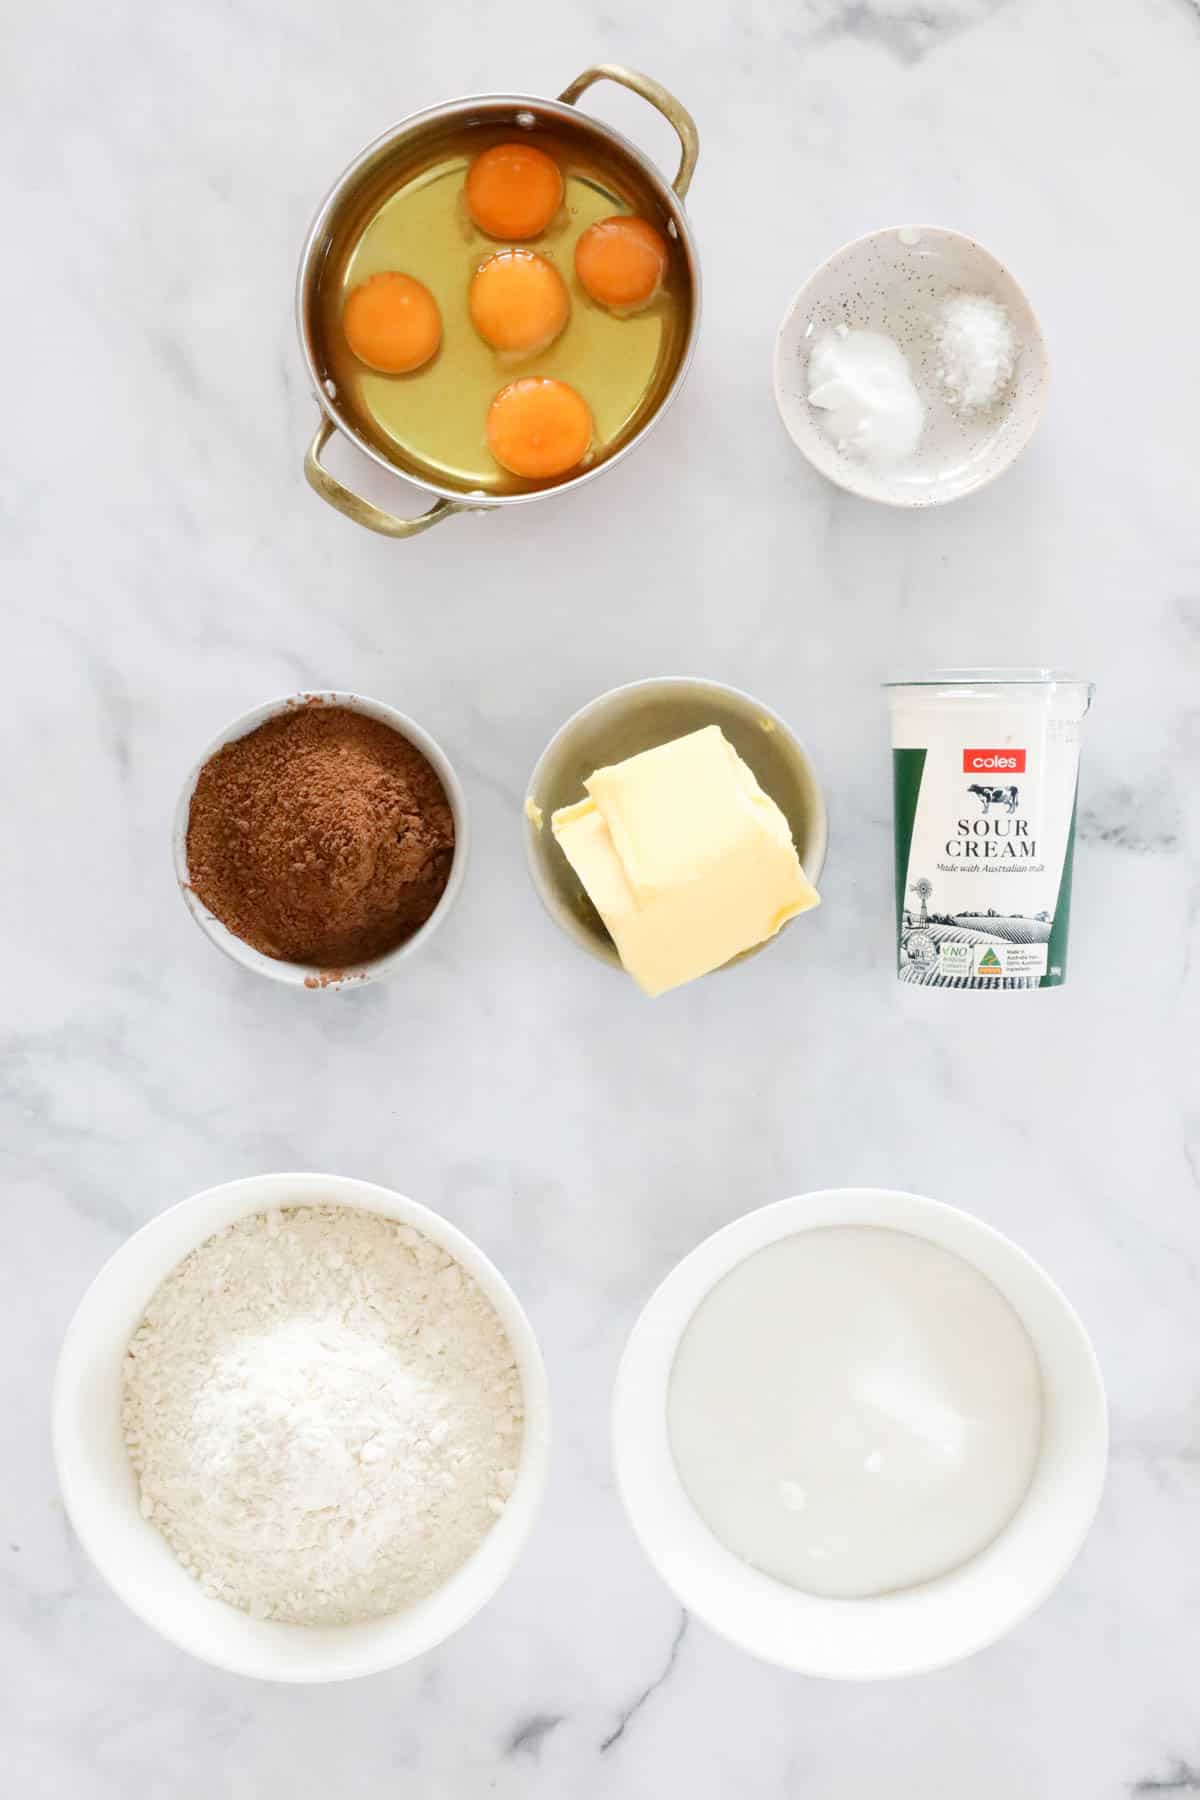 Ingredients needed to make chocolate sour cream pound cake